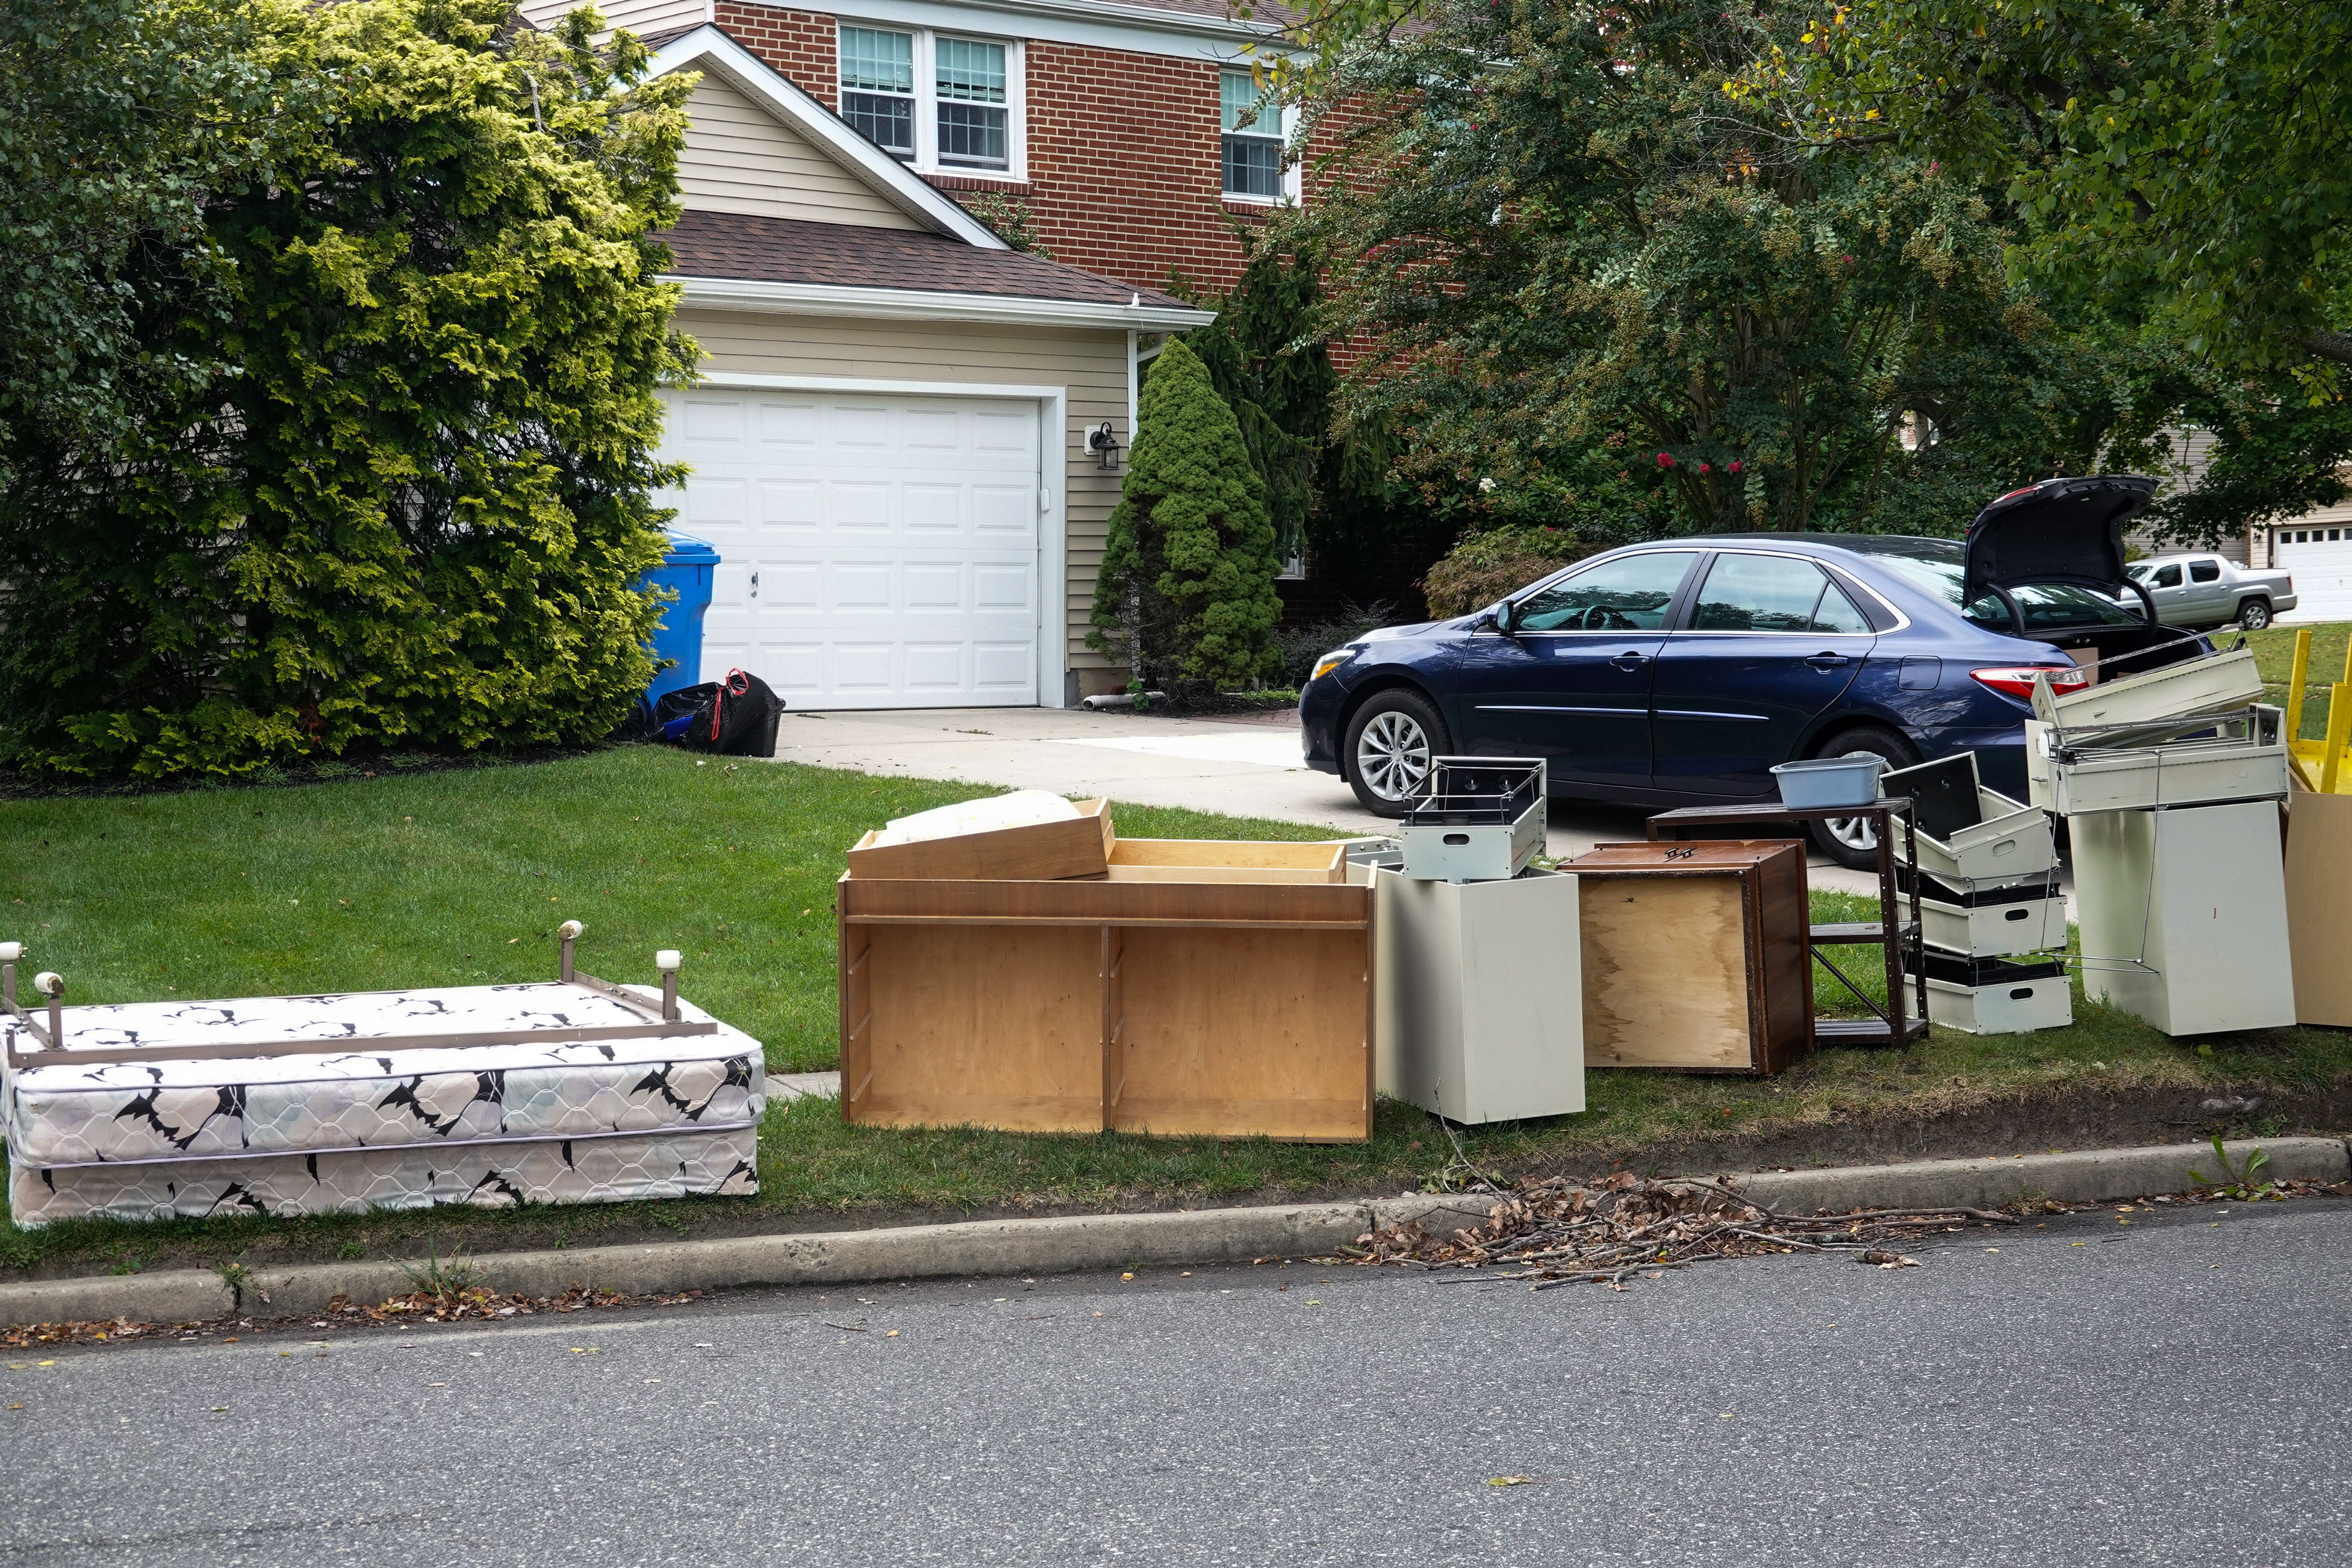 How to Find the Best Junk Hauling Services